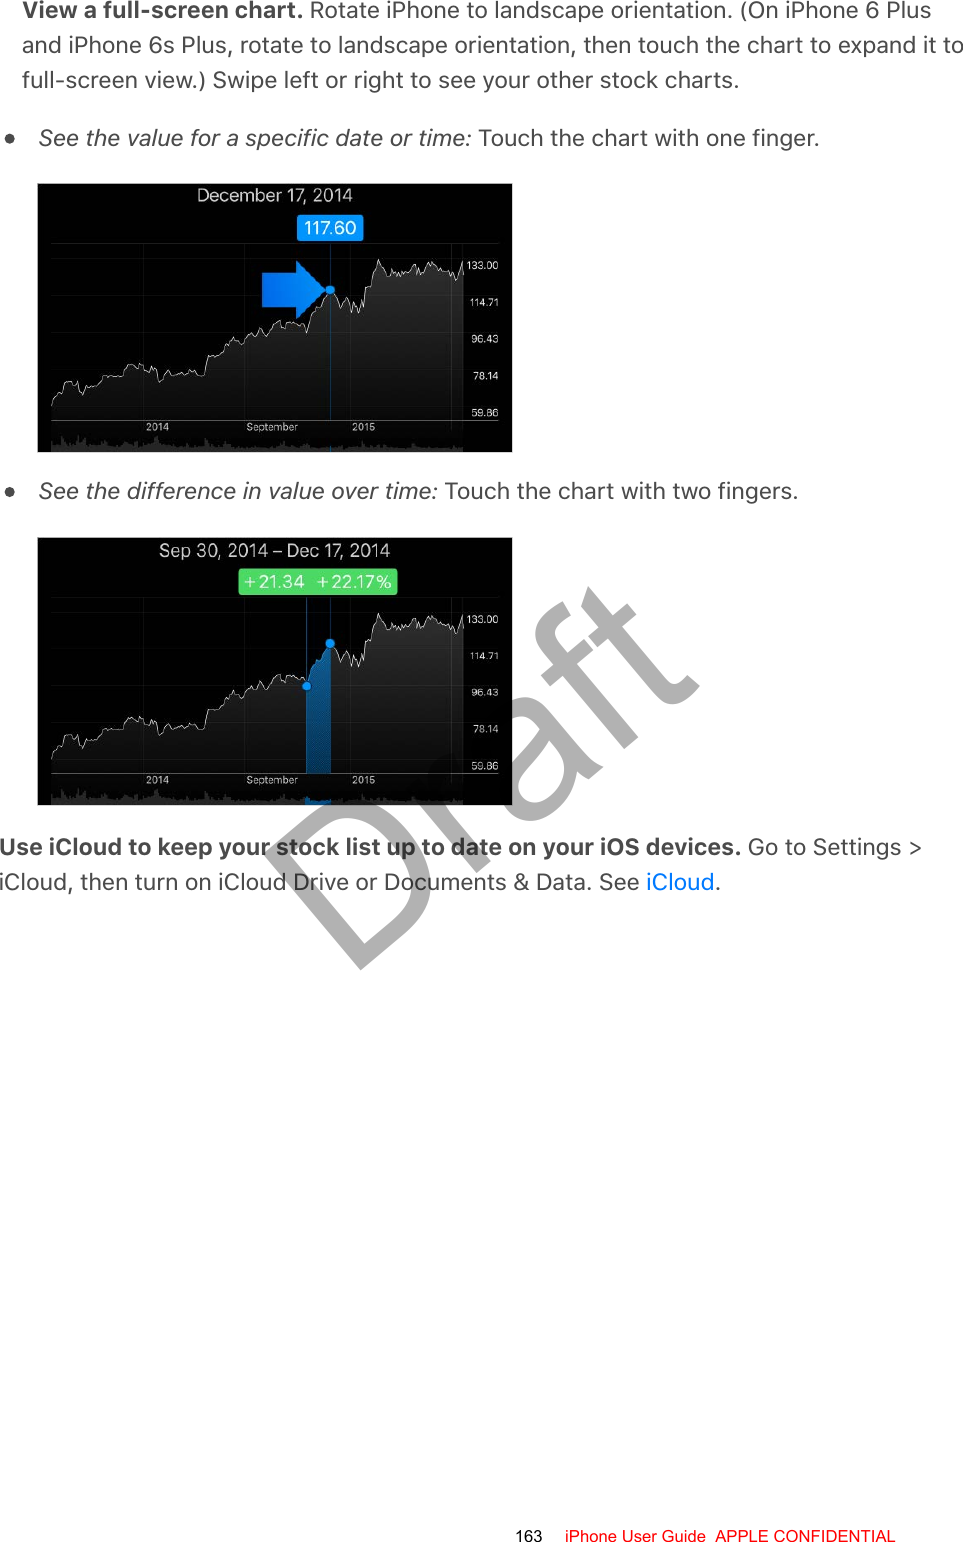 View a full-screen chart. Rotate iPhone to landscape orientation. (On iPhone 6 Plusand iPhone 6s Plus, rotate to landscape orientation, then touch the chart to expand it tofull-screen view.) Swipe left or right to see your other stock charts.See the value for a specific date or time: Touch the chart with one finger.See the difference in value over time: Touch the chart with two fingers.Use iCloud to keep your stock list up to date on your iOS devices. Go to Settings &gt;iCloud, then turn on iCloud Drive or Documents &amp; Data. See  .iCloud163 iPhone User Guide  APPLE CONFIDENTIALDraft